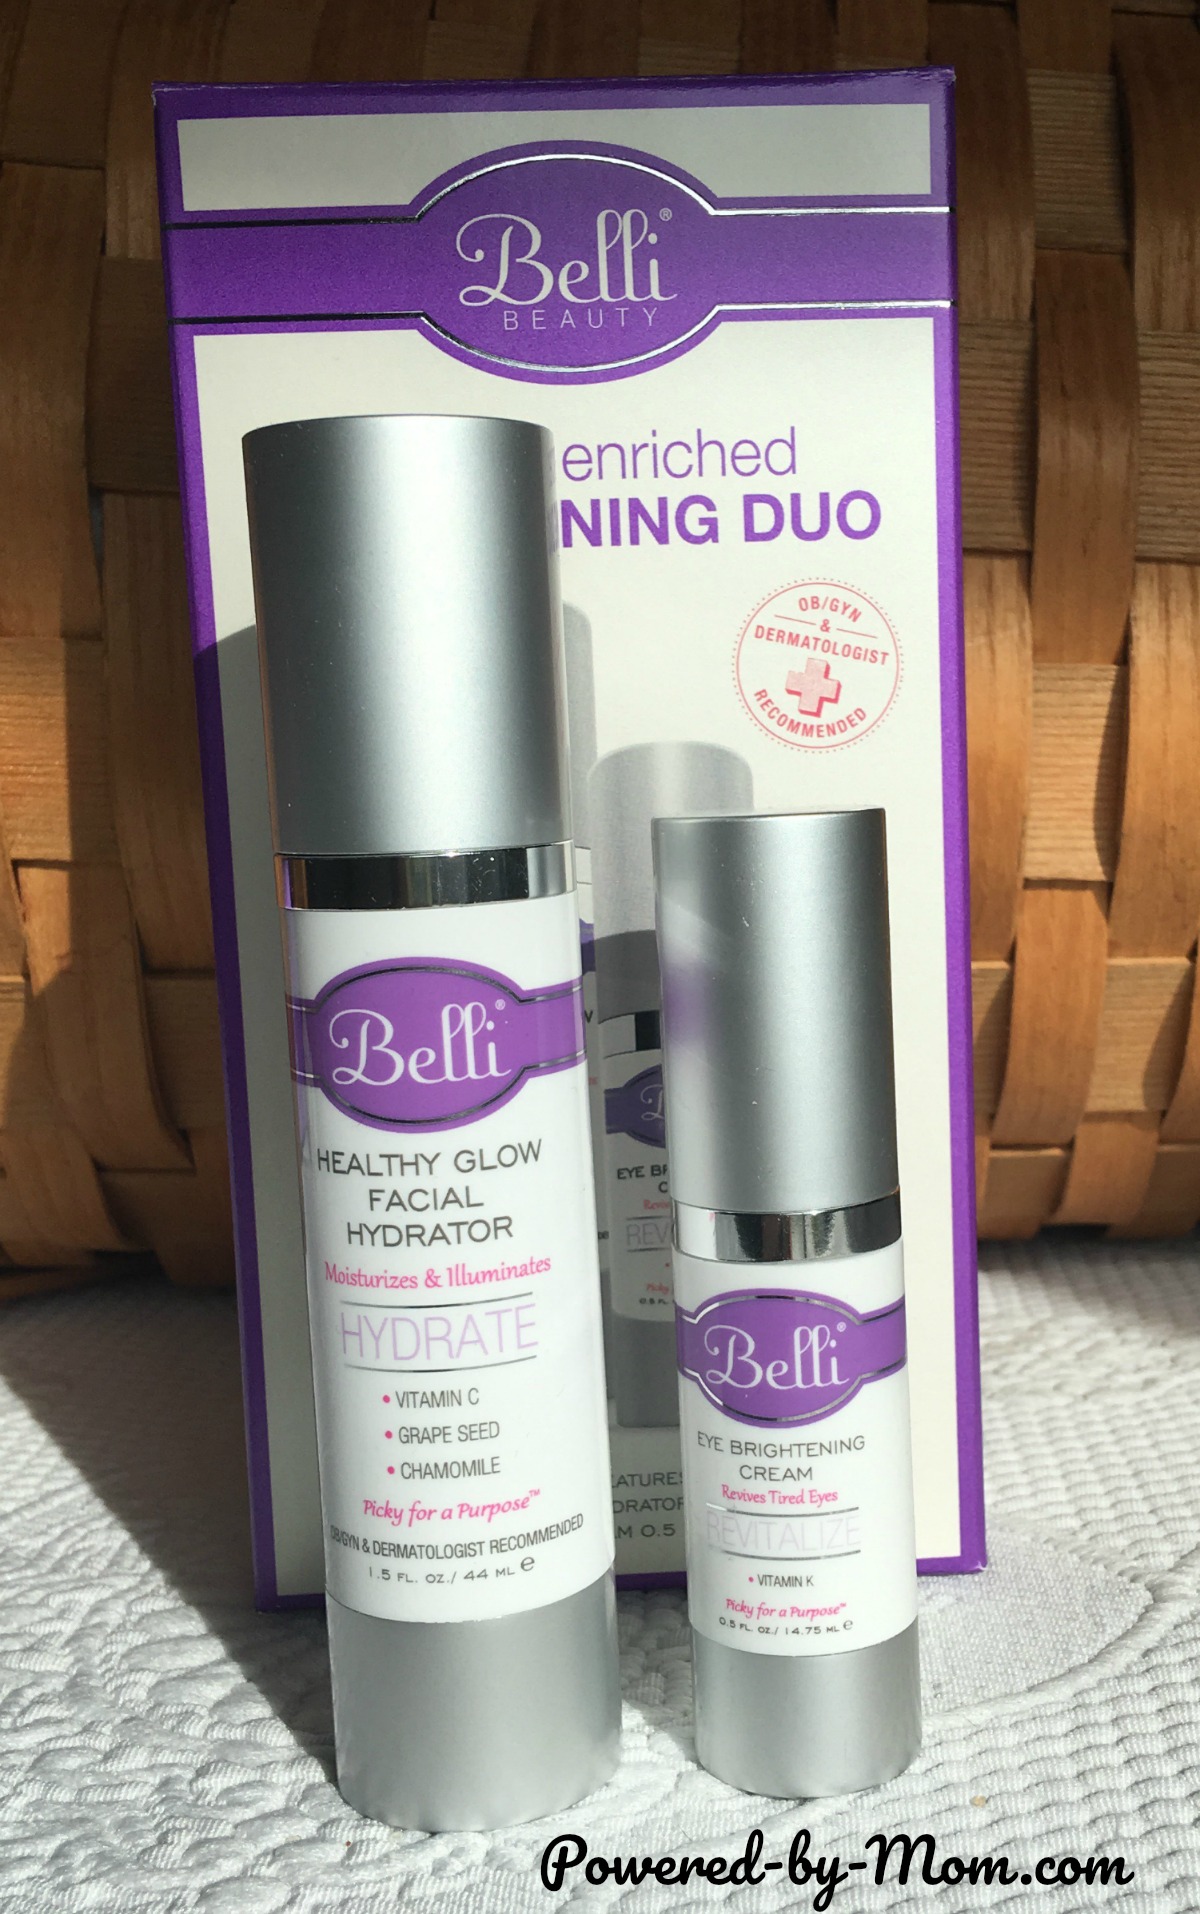 Belli Beauty Review - Powered by Mom